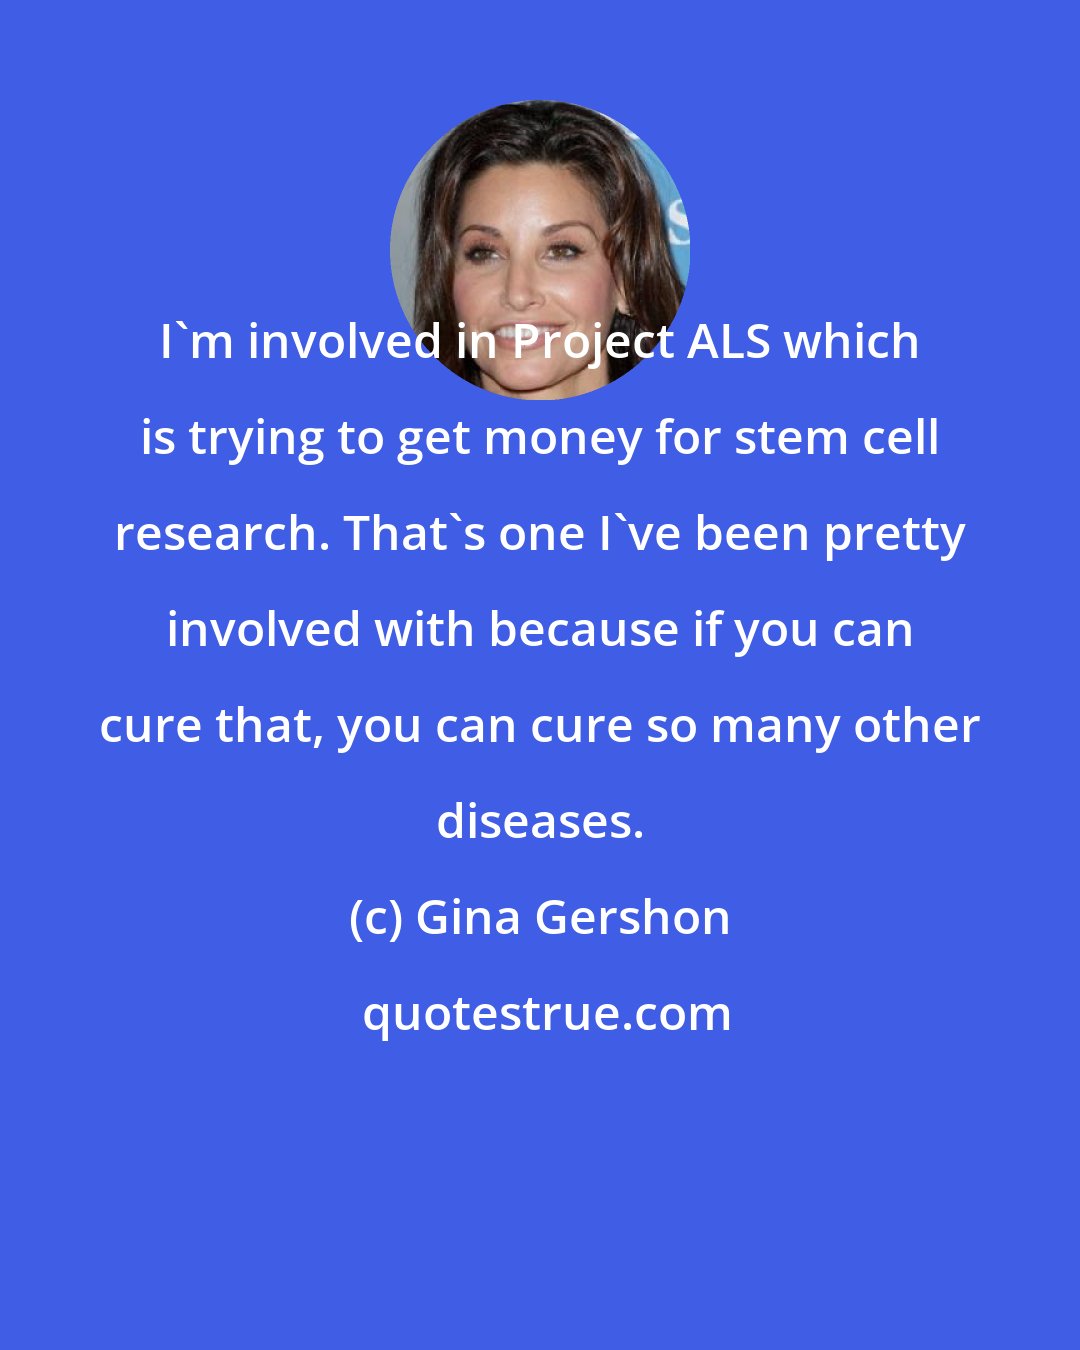 Gina Gershon: I'm involved in Project ALS which is trying to get money for stem cell research. That's one I've been pretty involved with because if you can cure that, you can cure so many other diseases.